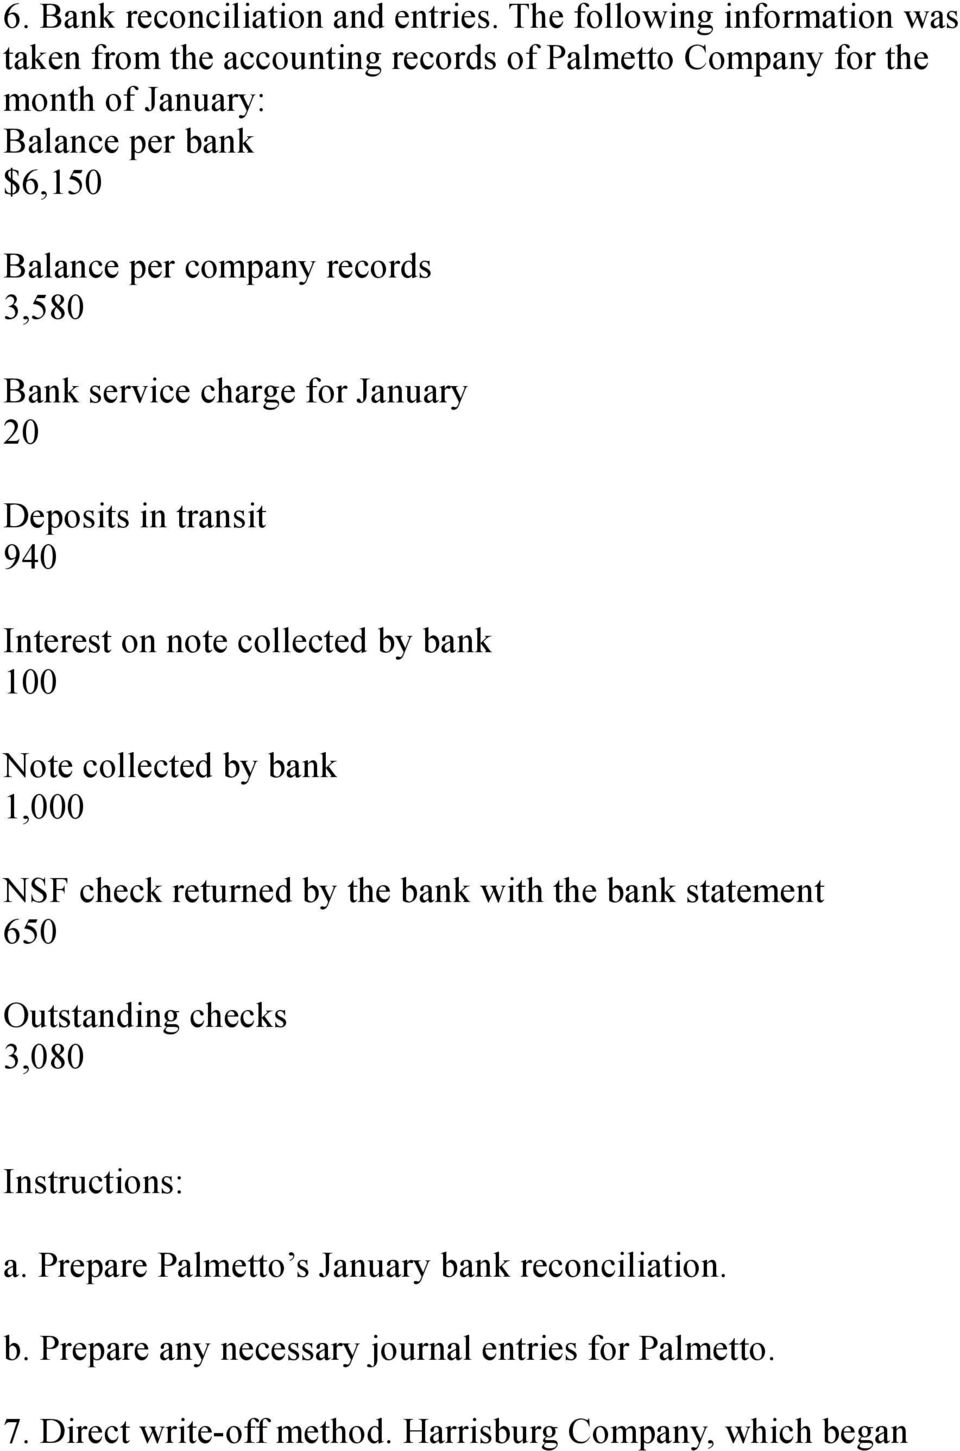 company records 3,580 Bank service charge for January 20 Deposits in transit 940 Interest on note collected by bank 100 Note collected by bank 1,000